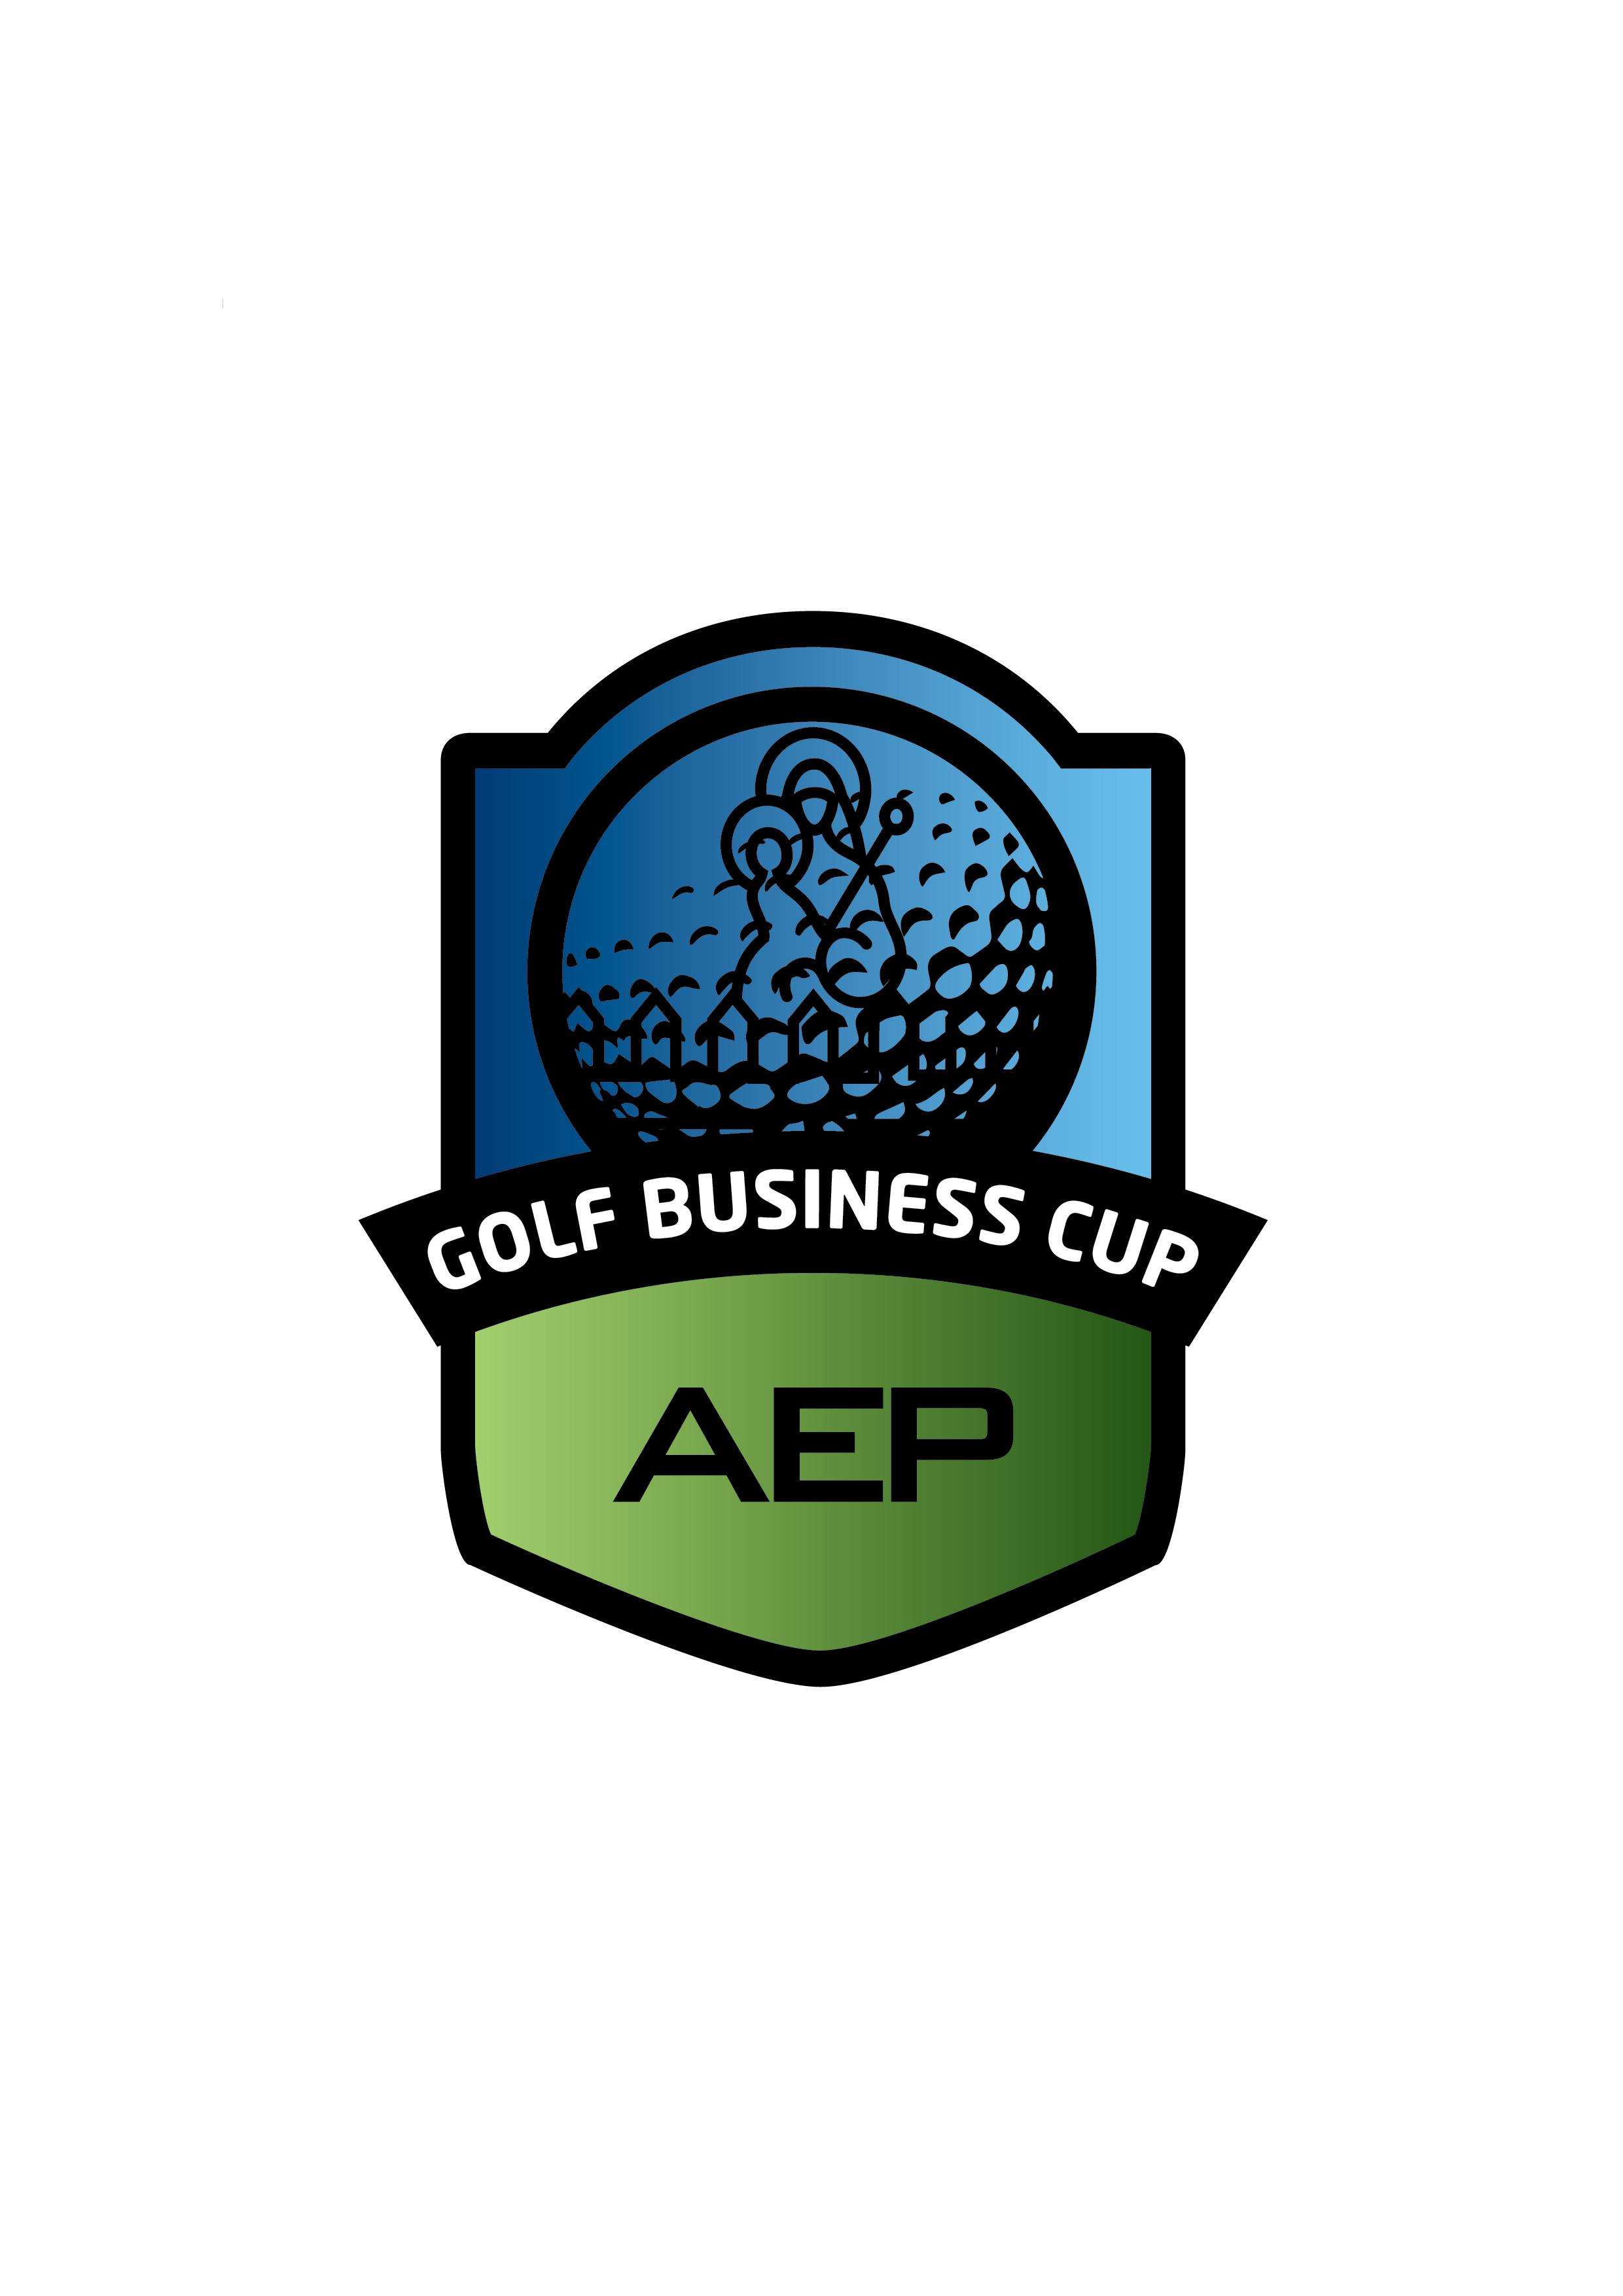 Torneio AEP Golf Business Cup (Pares, Four ball, Better ball) 